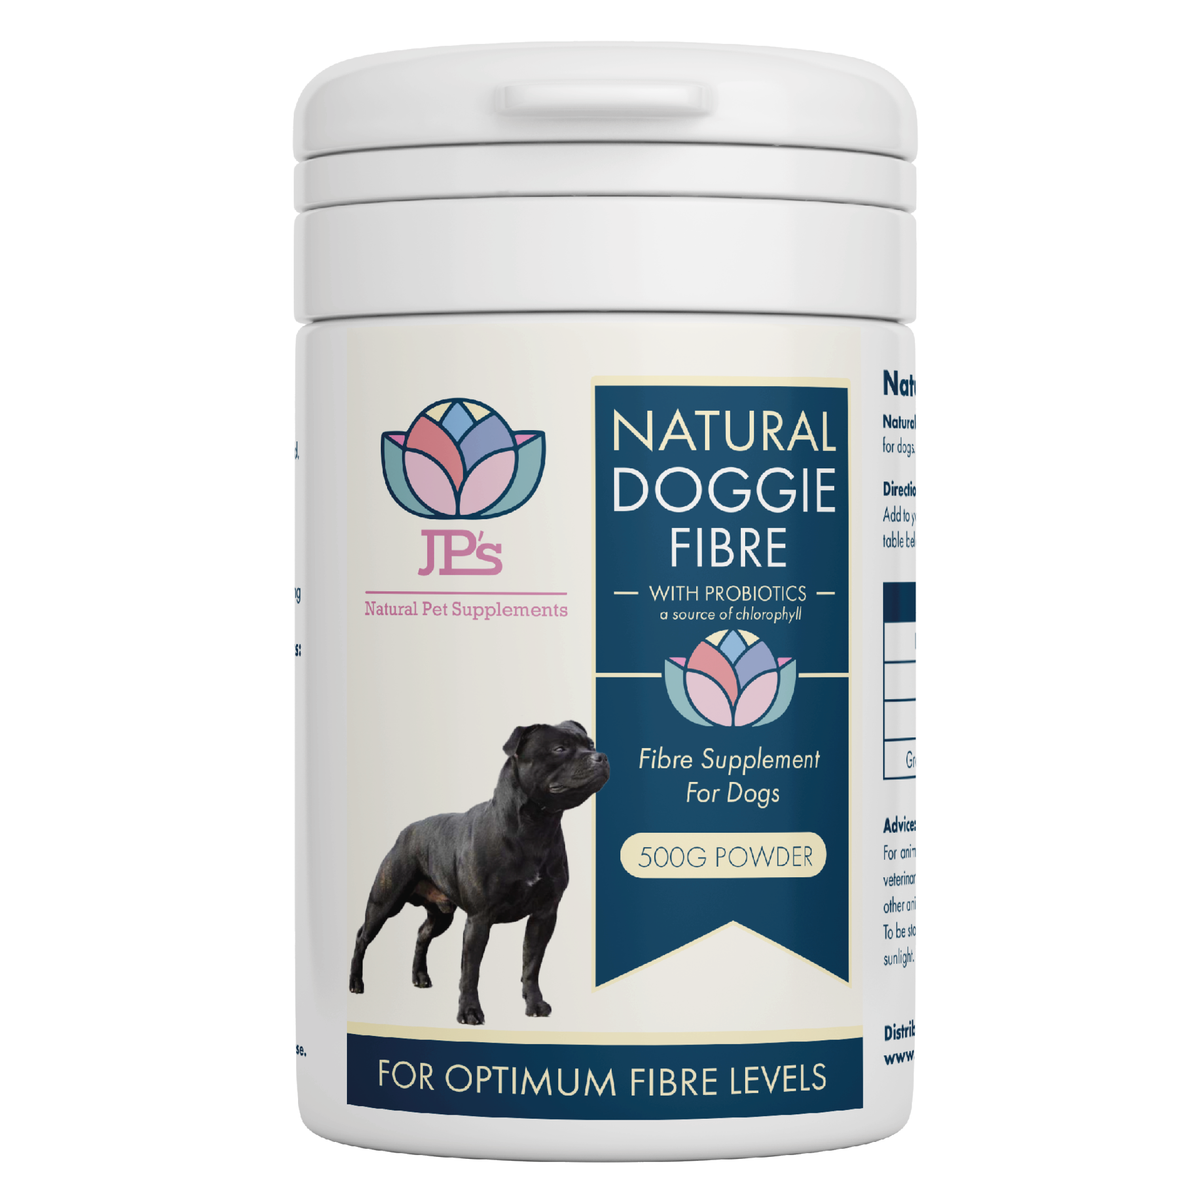 Natural fibre suppplement with probiotics for dogs